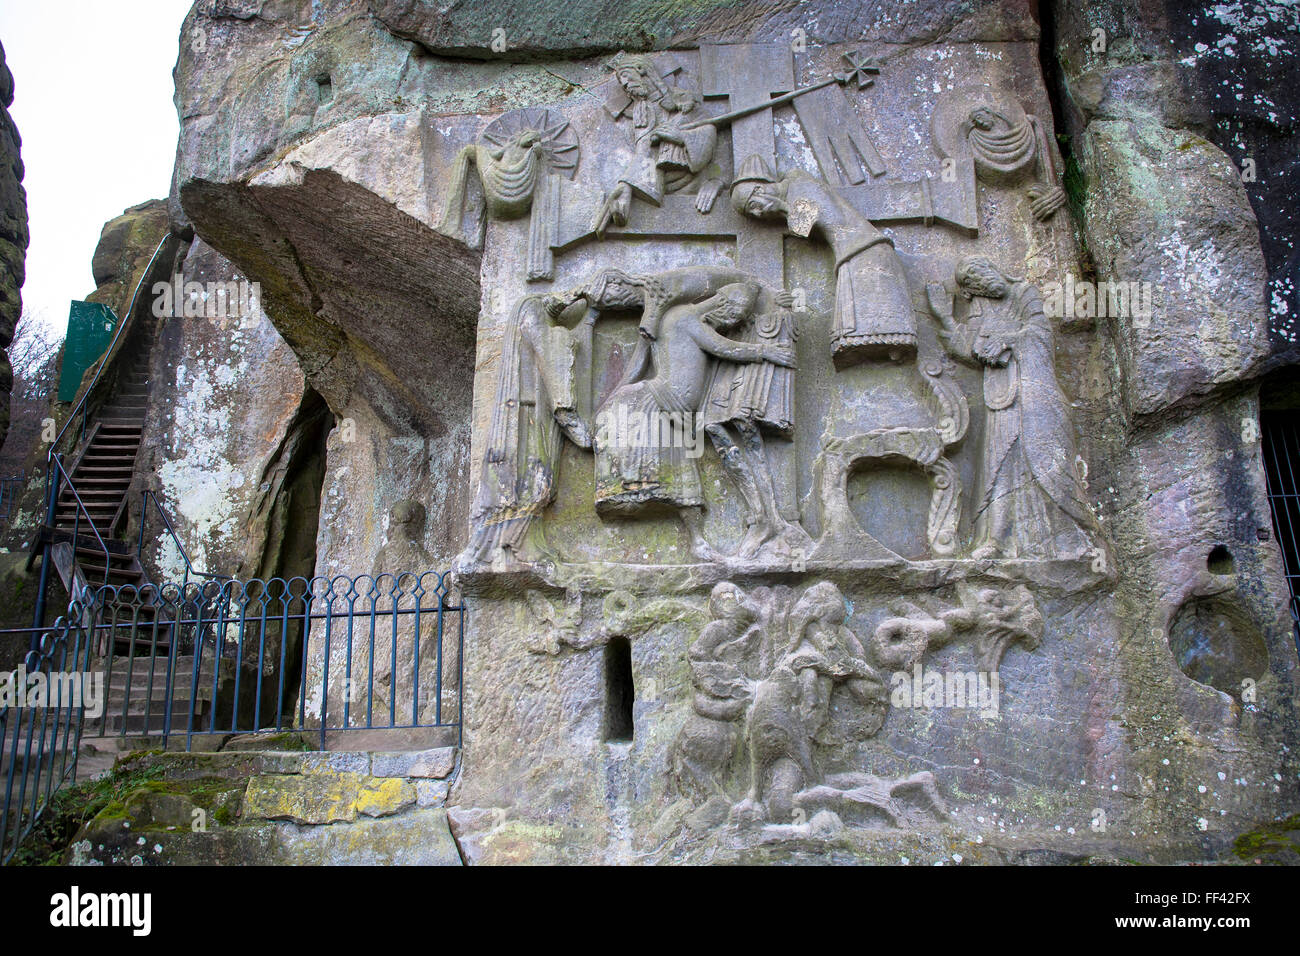 Europe, Germany, North Rhine-Westphalia, the Externsteine at the Teutoburg Forest near the city of Horn-Bad Meinberg, relief of  Stock Photo